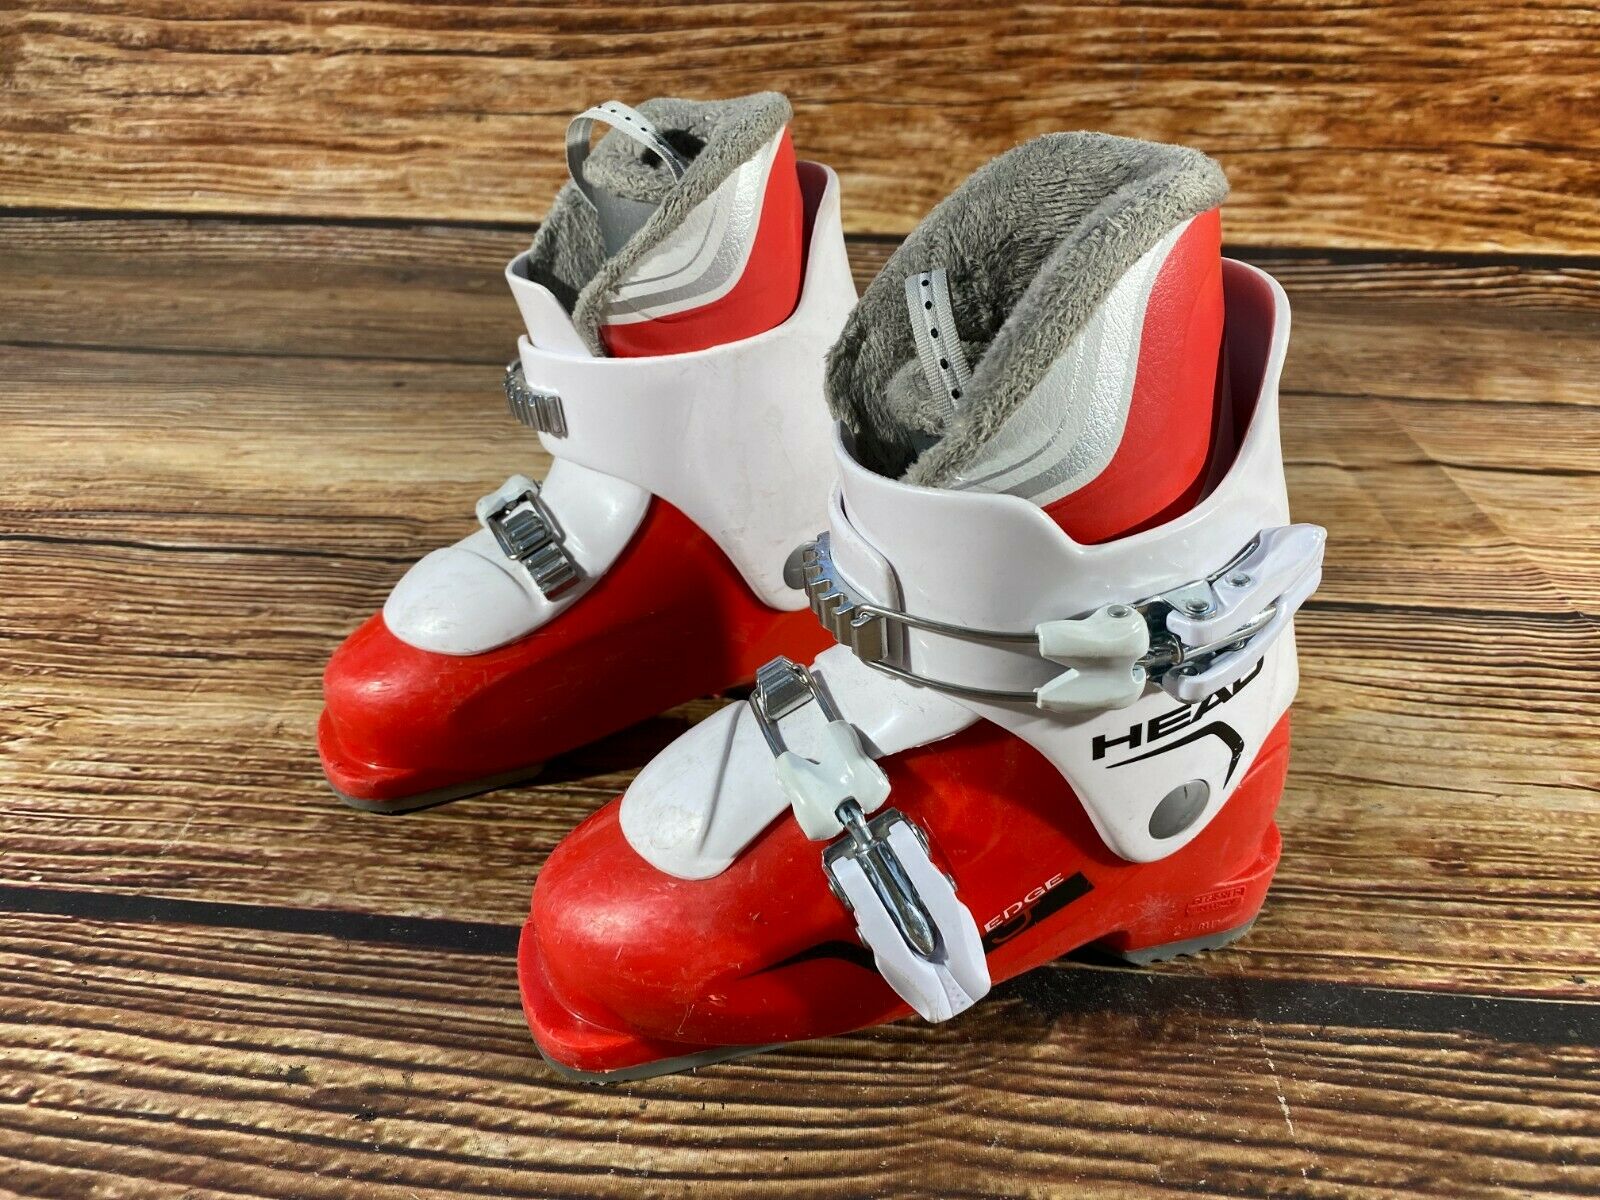 Head Alpine Ski Boots Kids / Youth Size Mondo 200 -205 Mm, Outer Sole 241 Mm